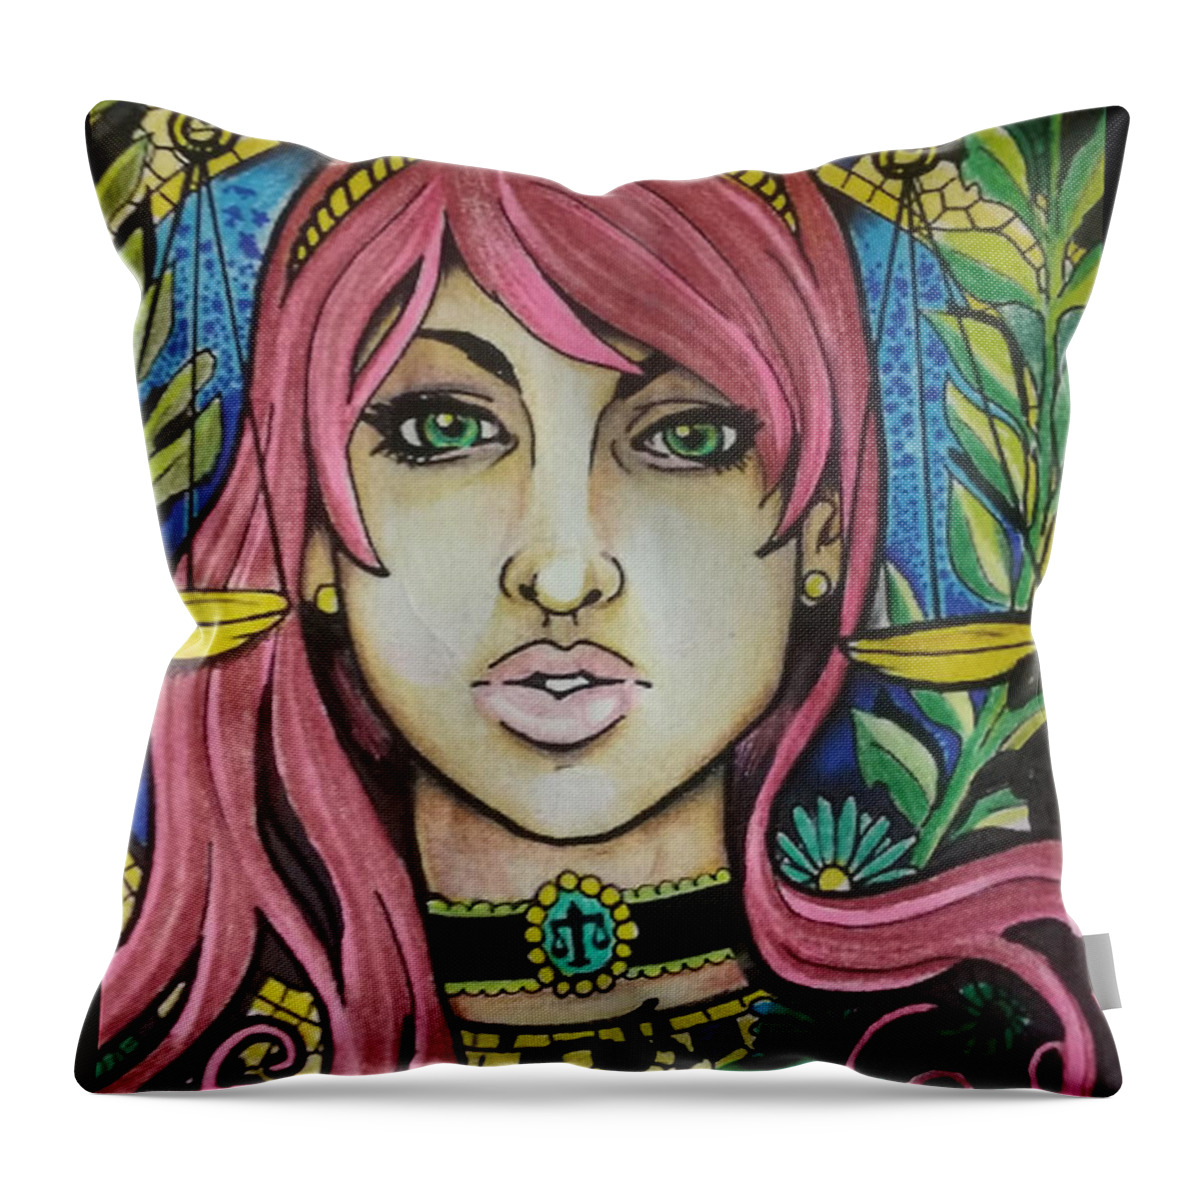 Black Art Throw Pillow featuring the drawing Untitled by Musafiir Salman